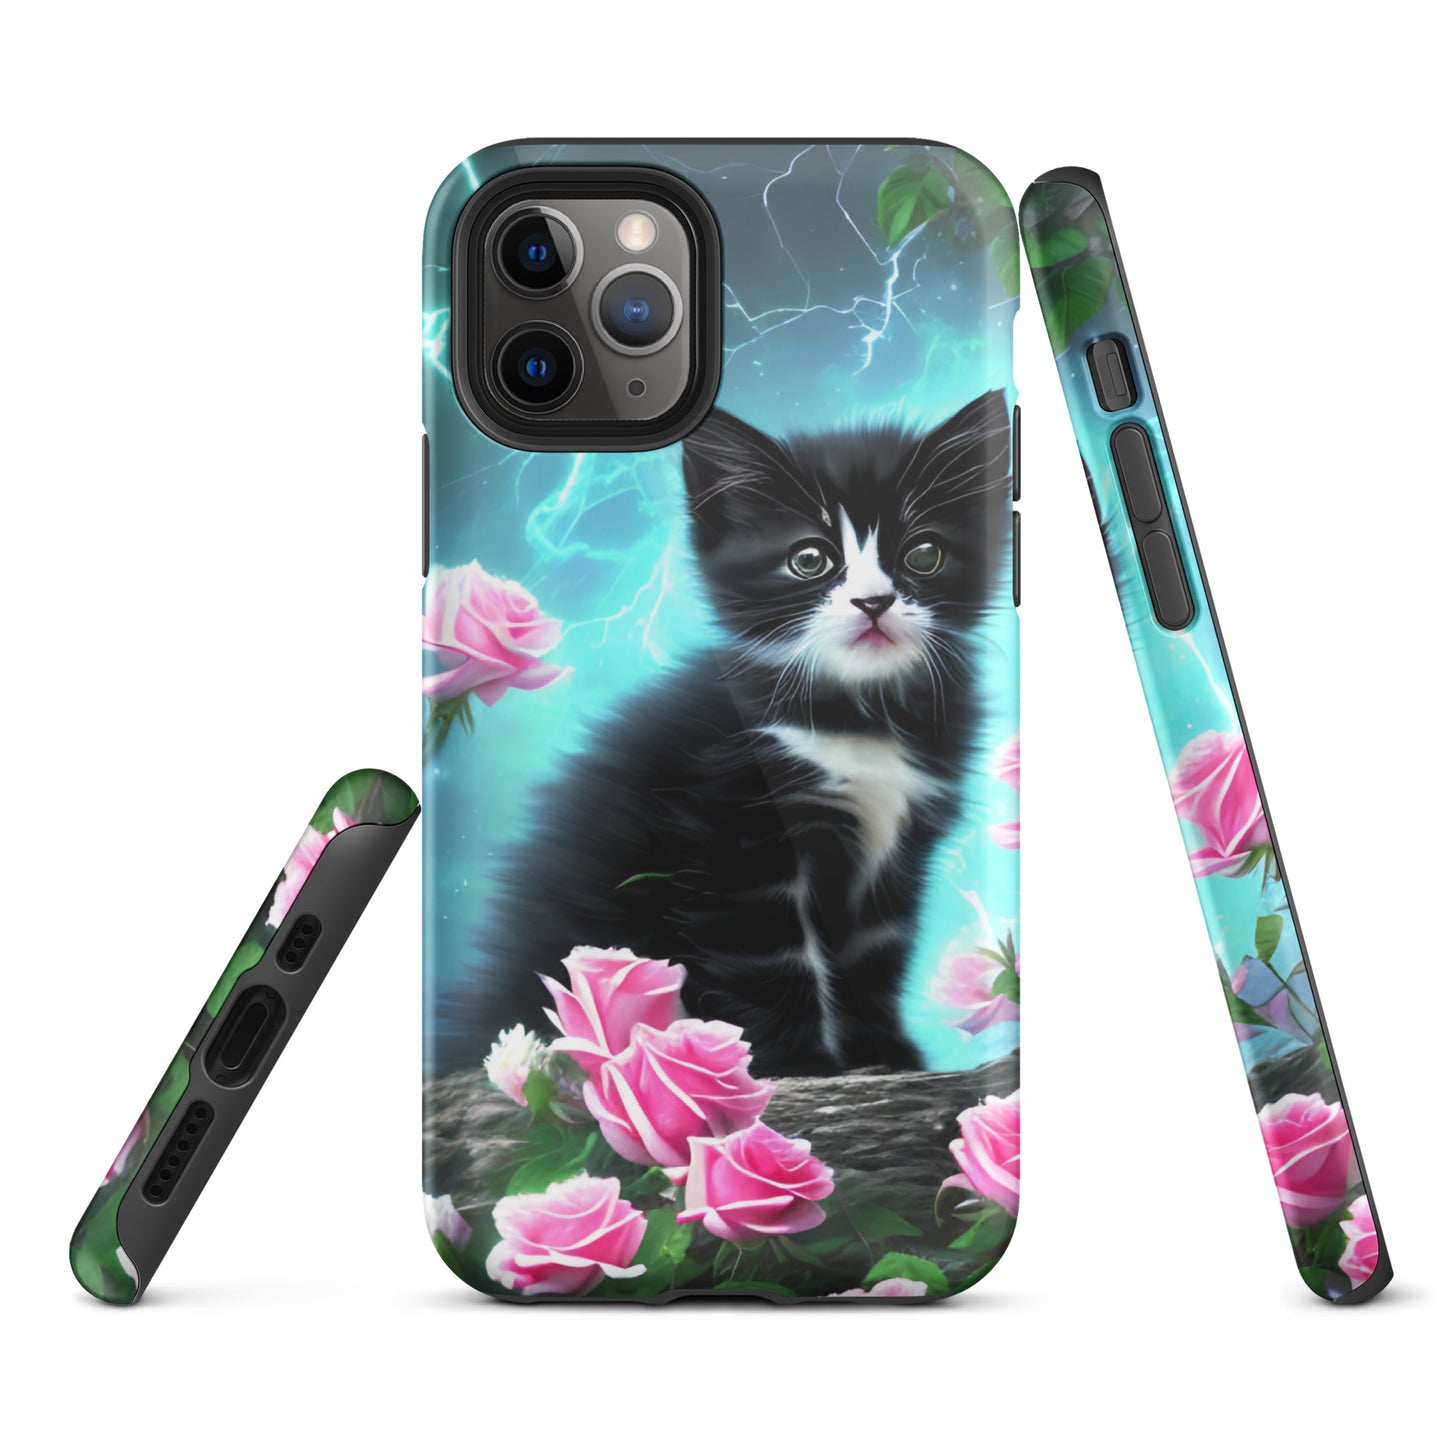 A picture of a iphone tough case with a fluffy black and white kitten sitting between some pink roses with a thunder storm in the background - glossy-iphone-11-profront